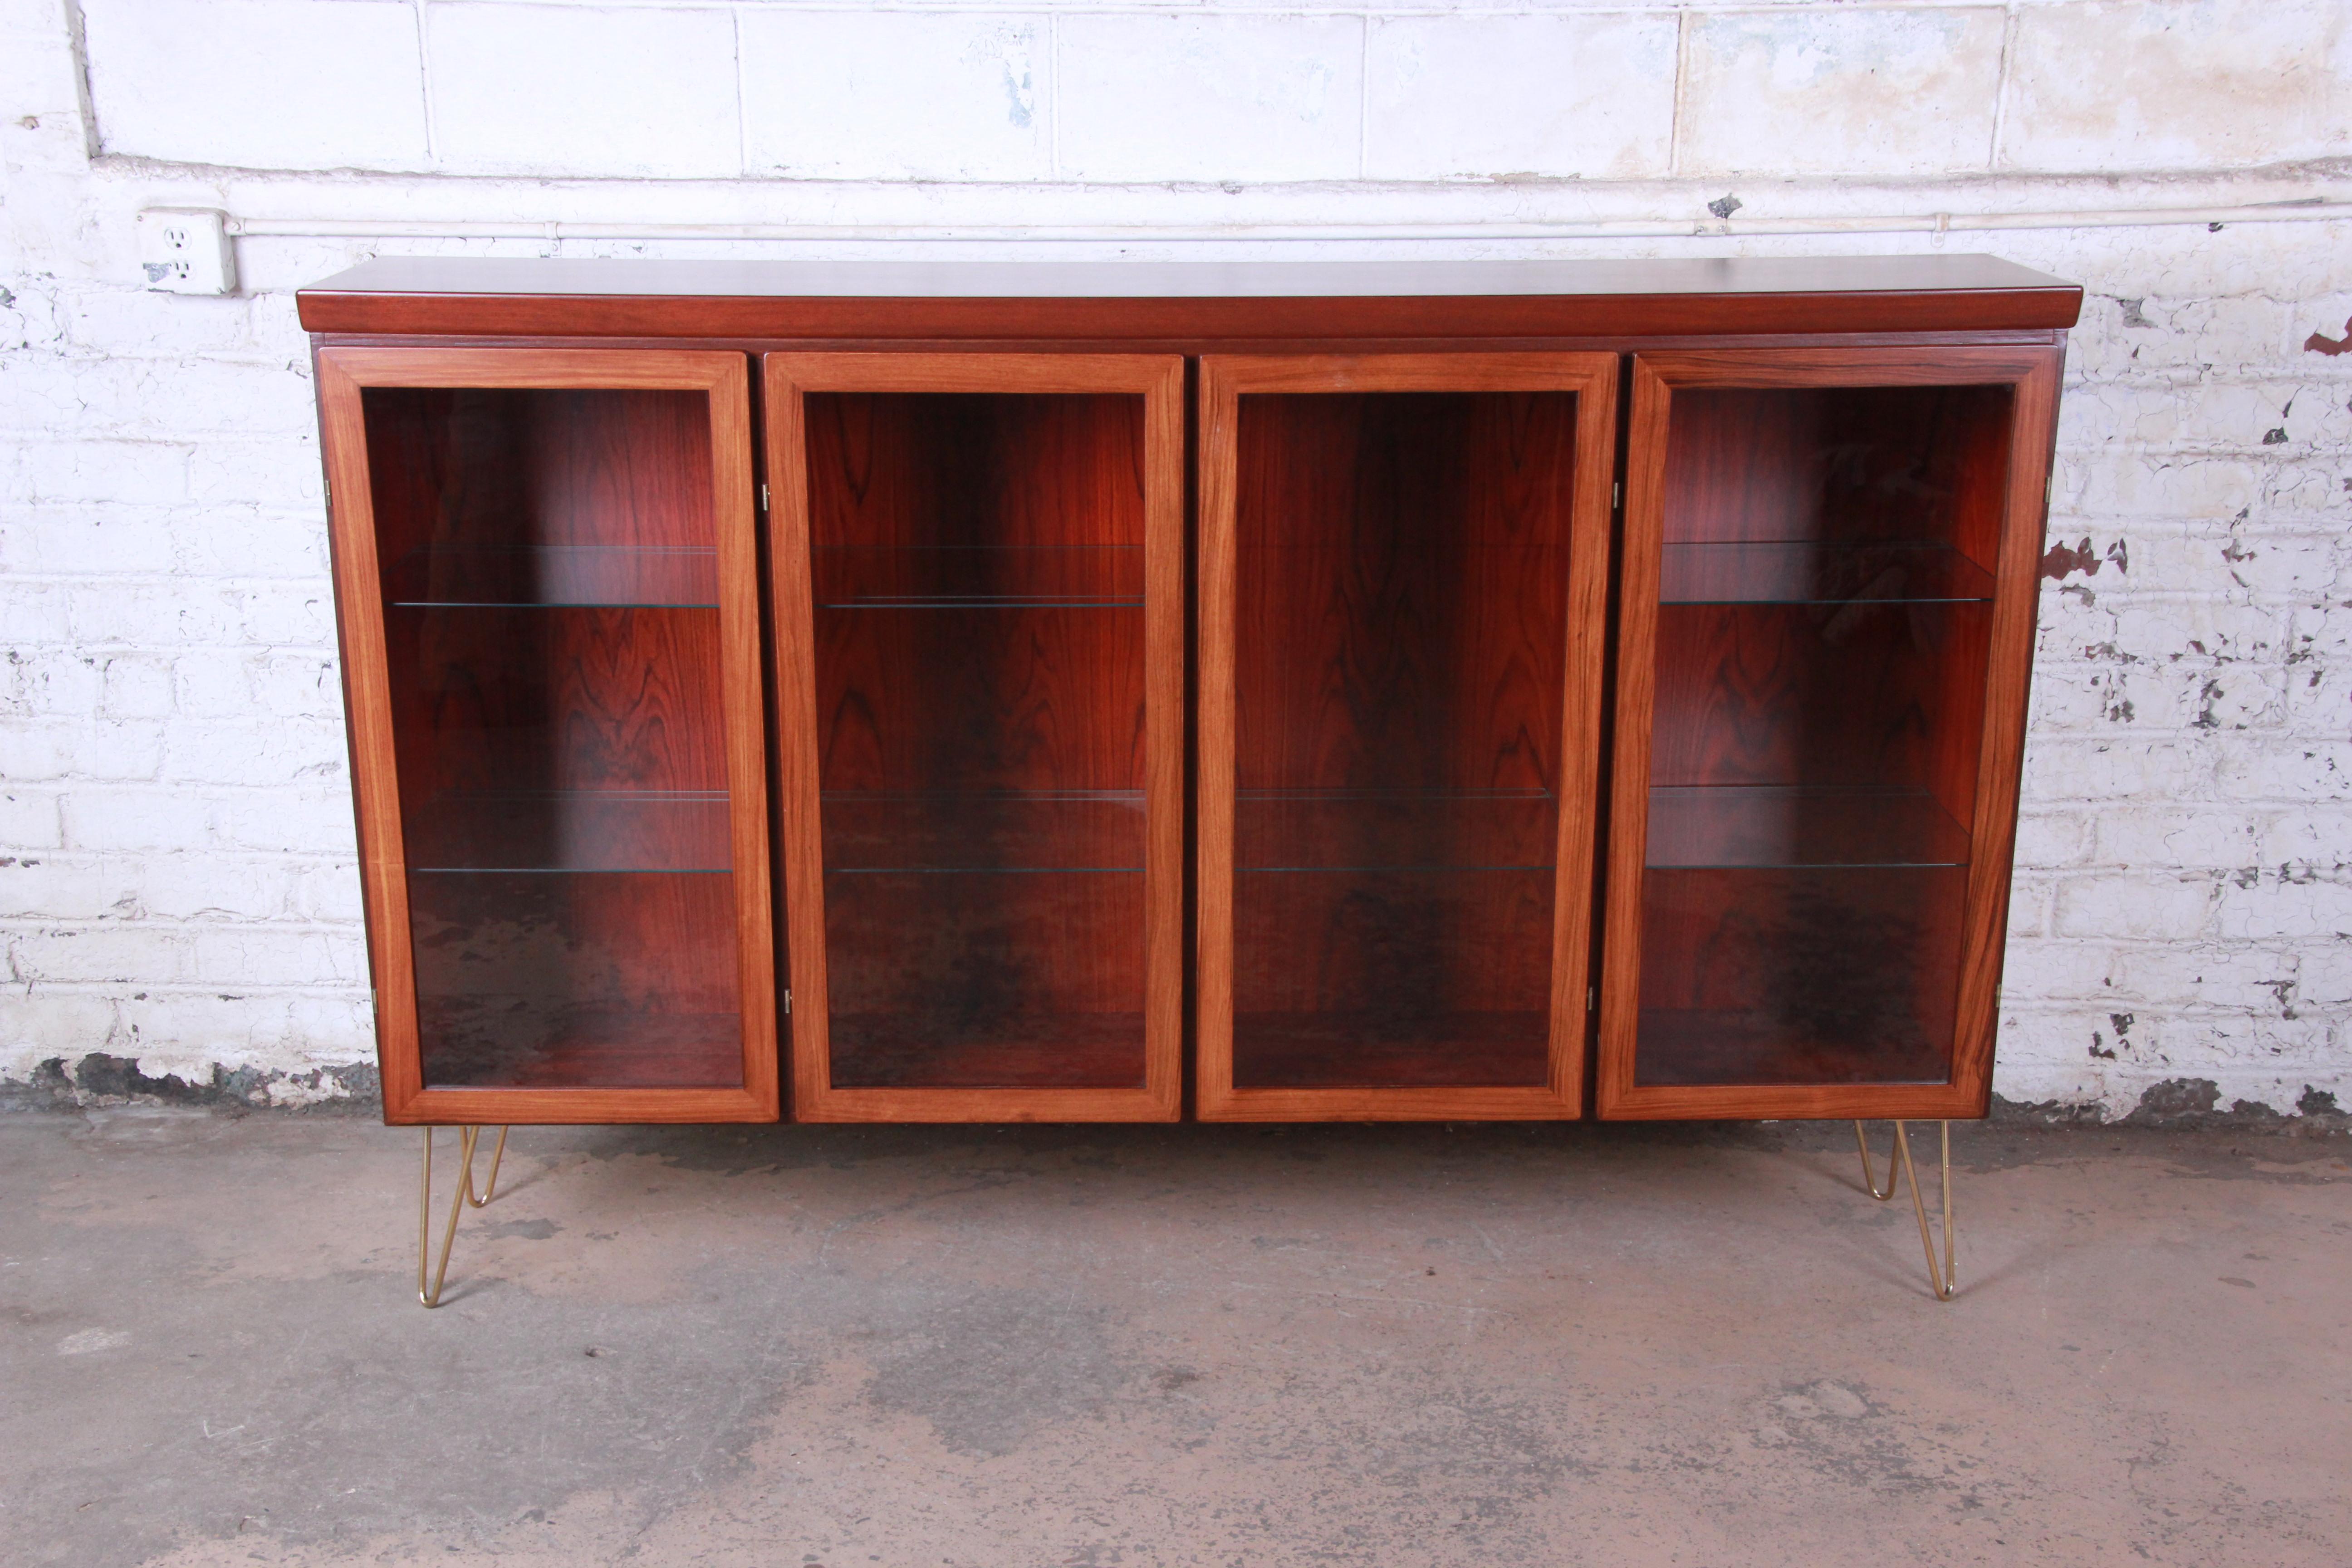 Offering an exceptional Danish rosewood glass front bookcase on hairpin legs by Skovby. The bookcase has four glass front doors that open up to adjustable glass shelves. The rosewood case is newly refinished with beautiful wood grain. The piece